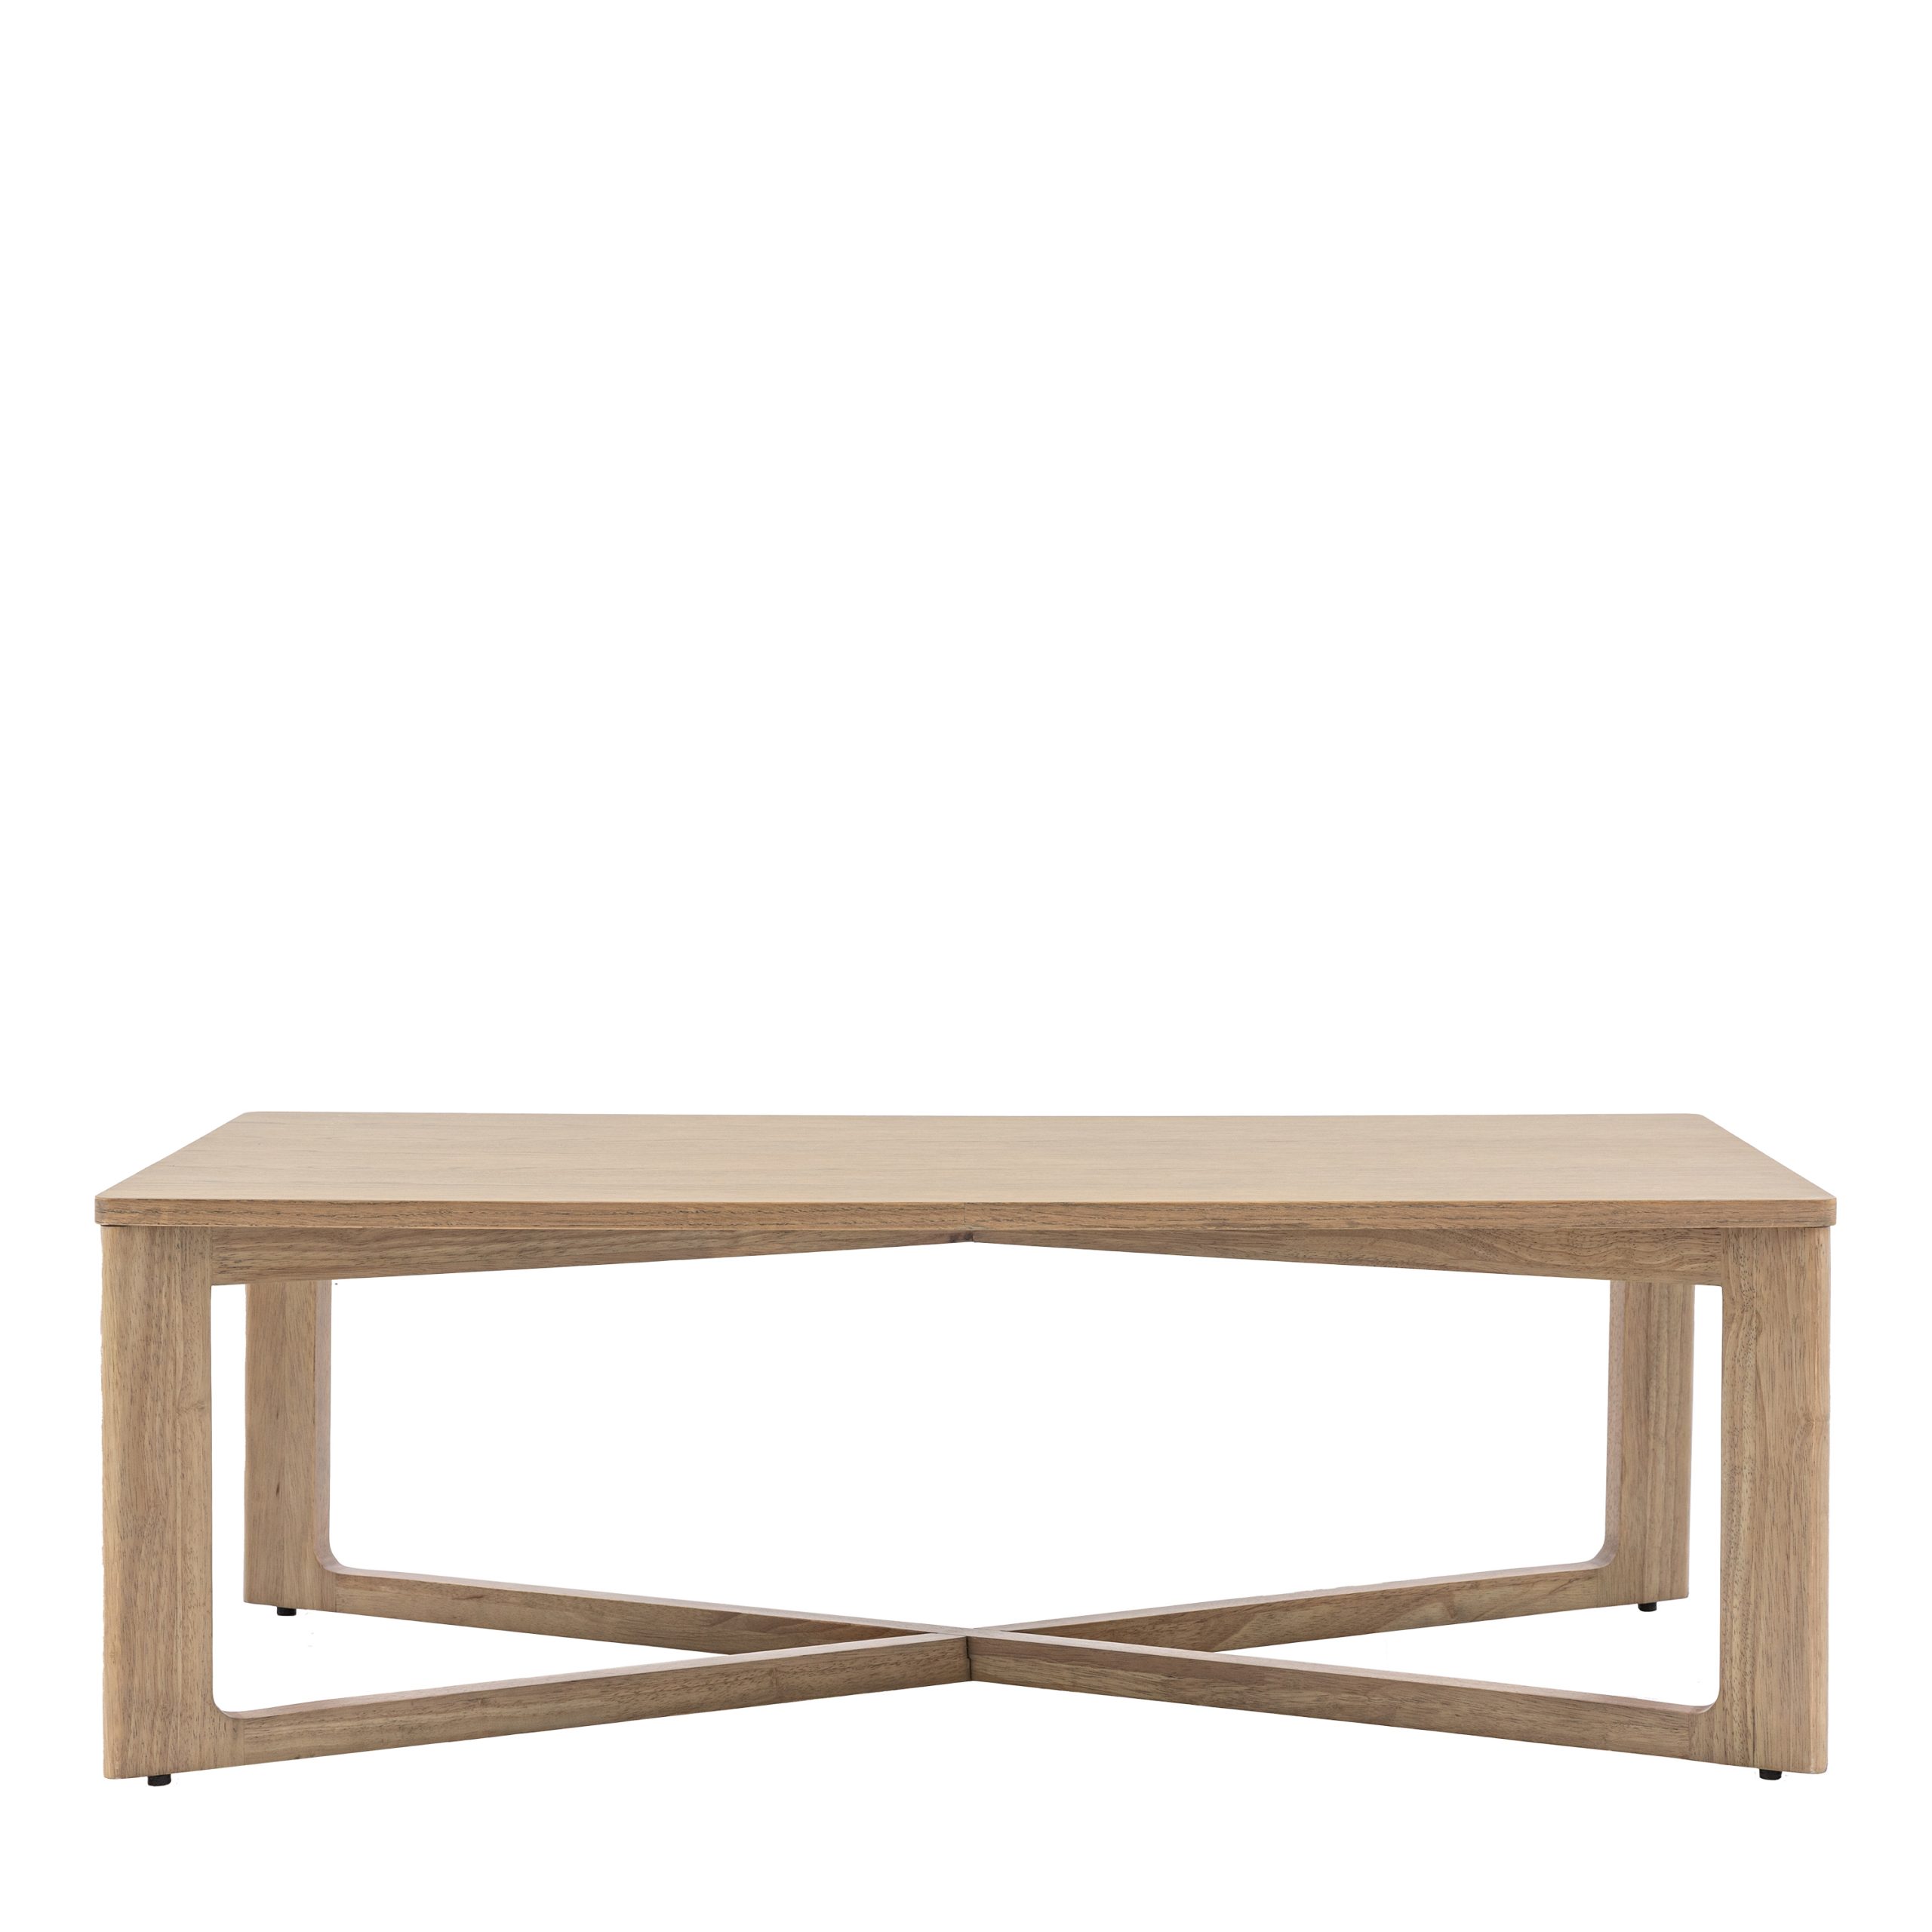 Gallery Direct Panelled Coffee Table